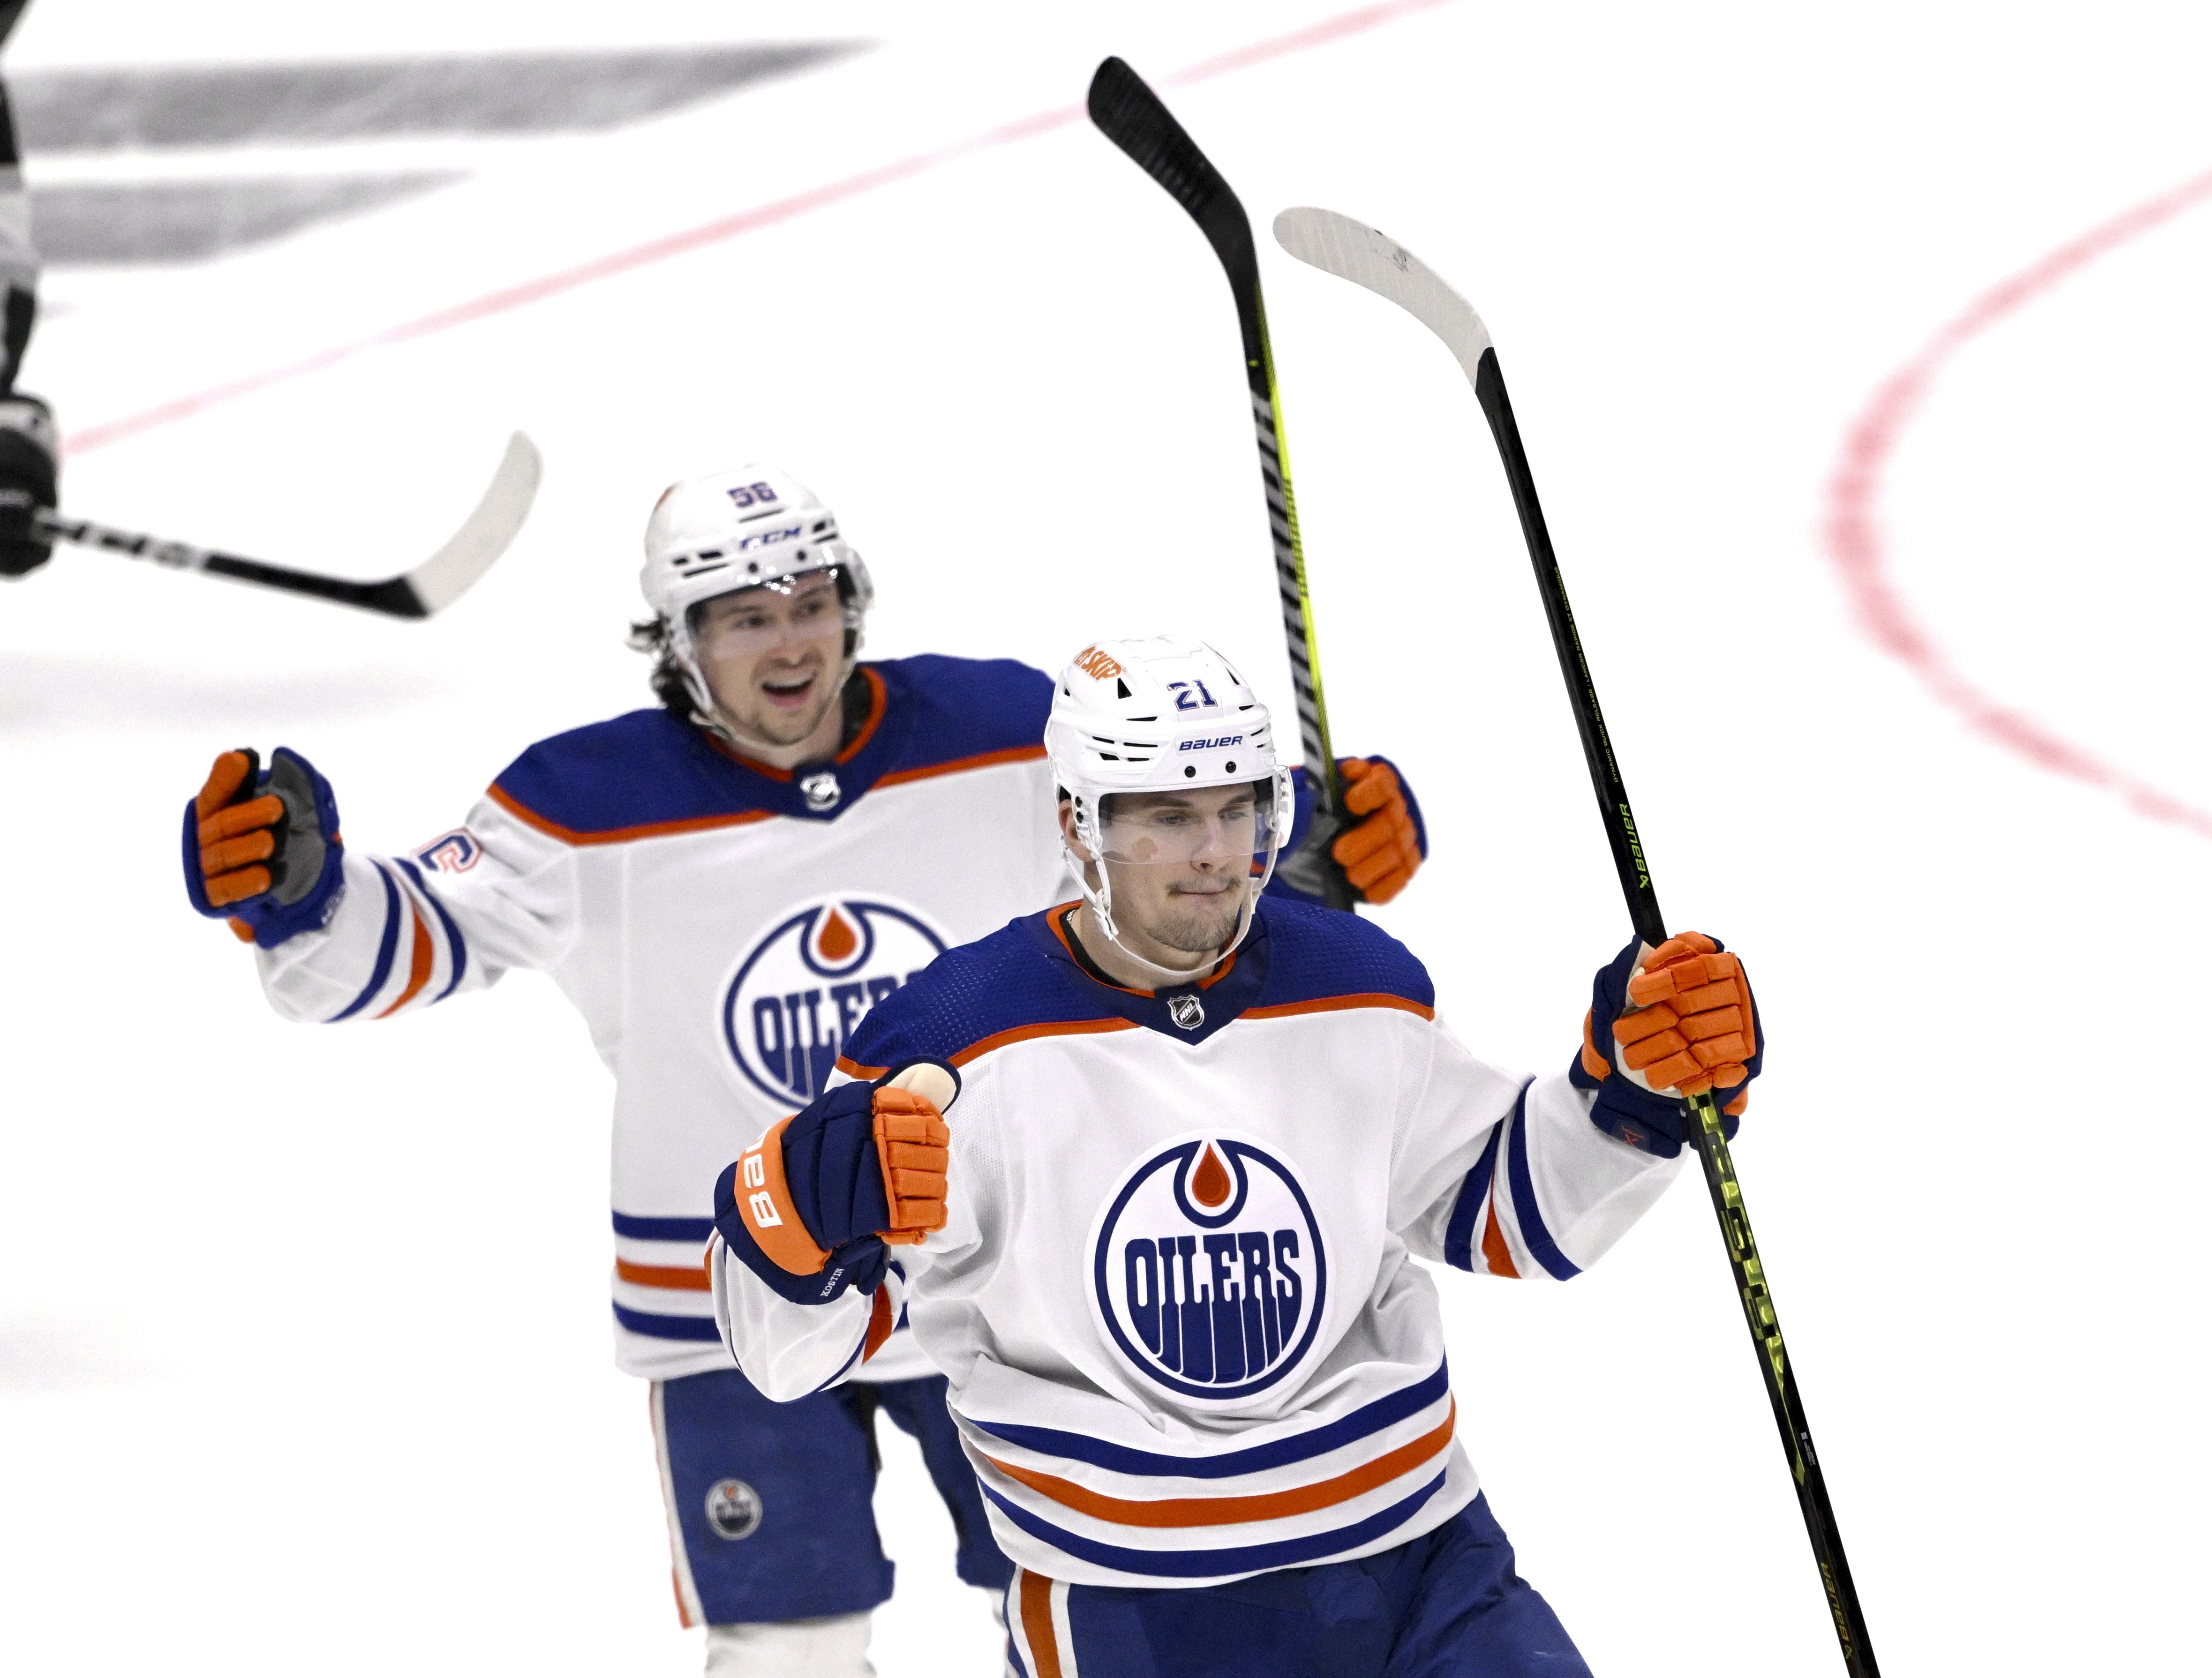 Oilers advance to second round with 5-4 victory over Kings